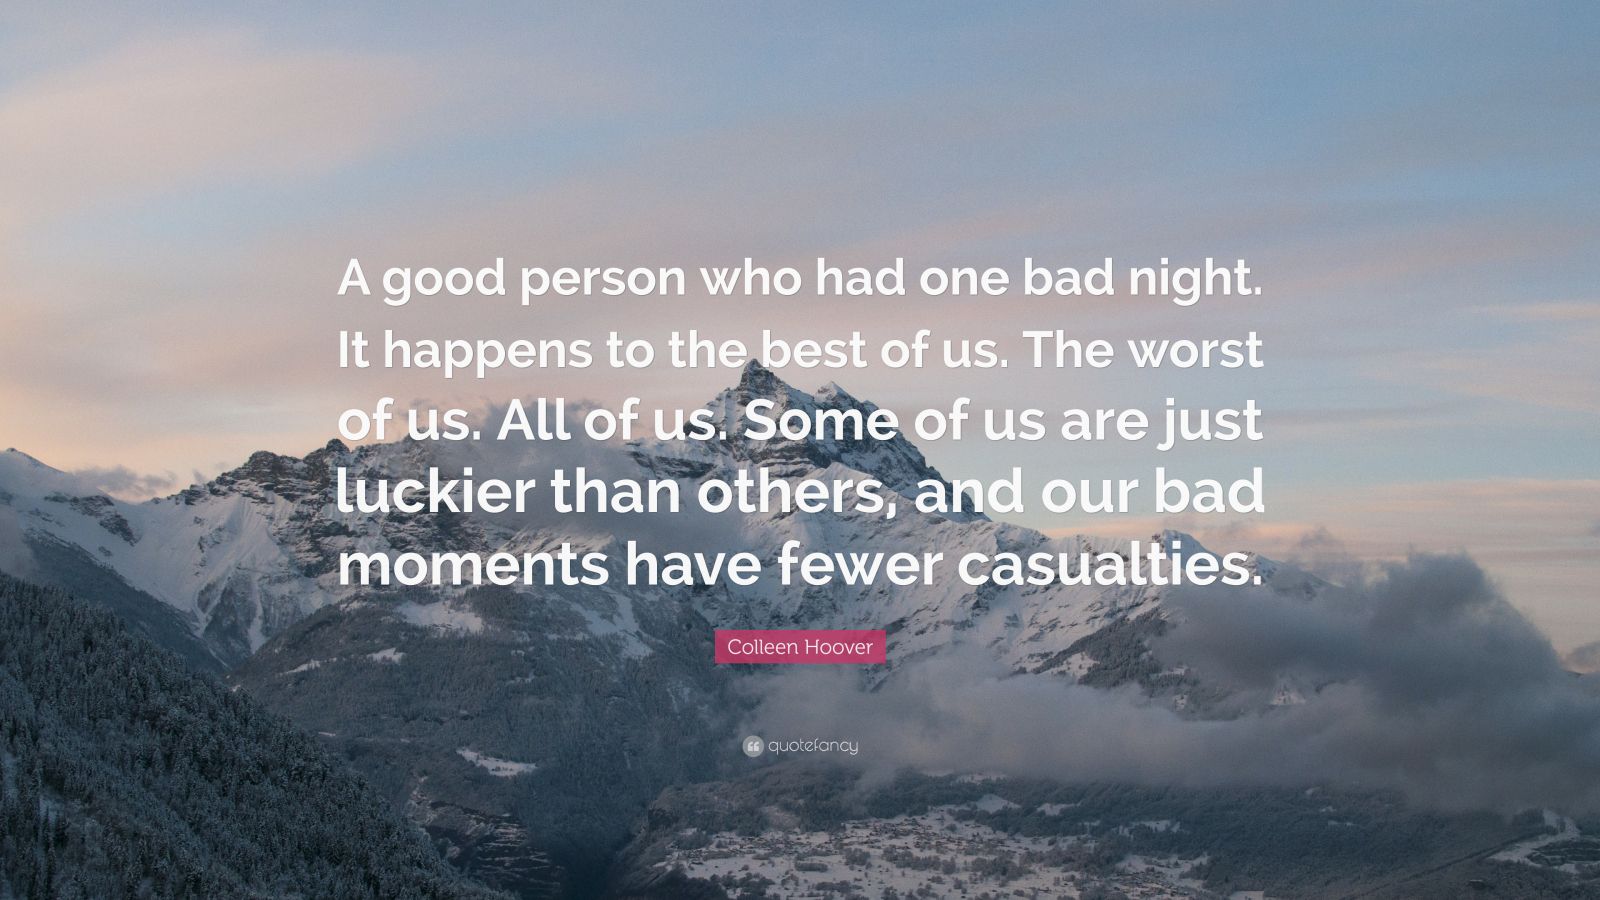 Colleen Hoover Quote: “A good person who had one bad night. It